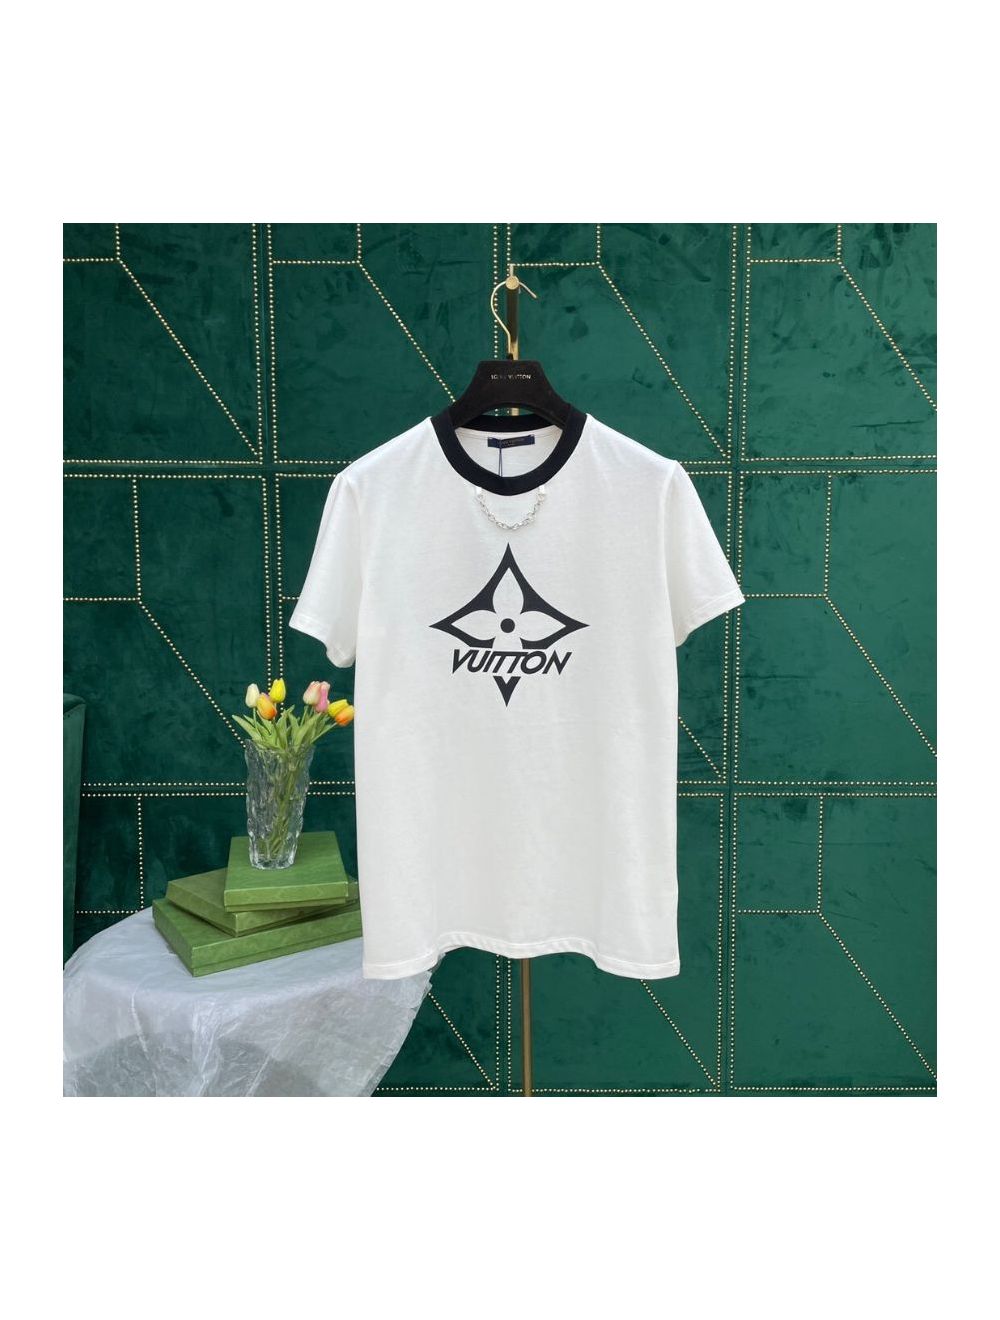 W2C] Louis Vuitton Peace & Love T that was popular on frp ~1 year